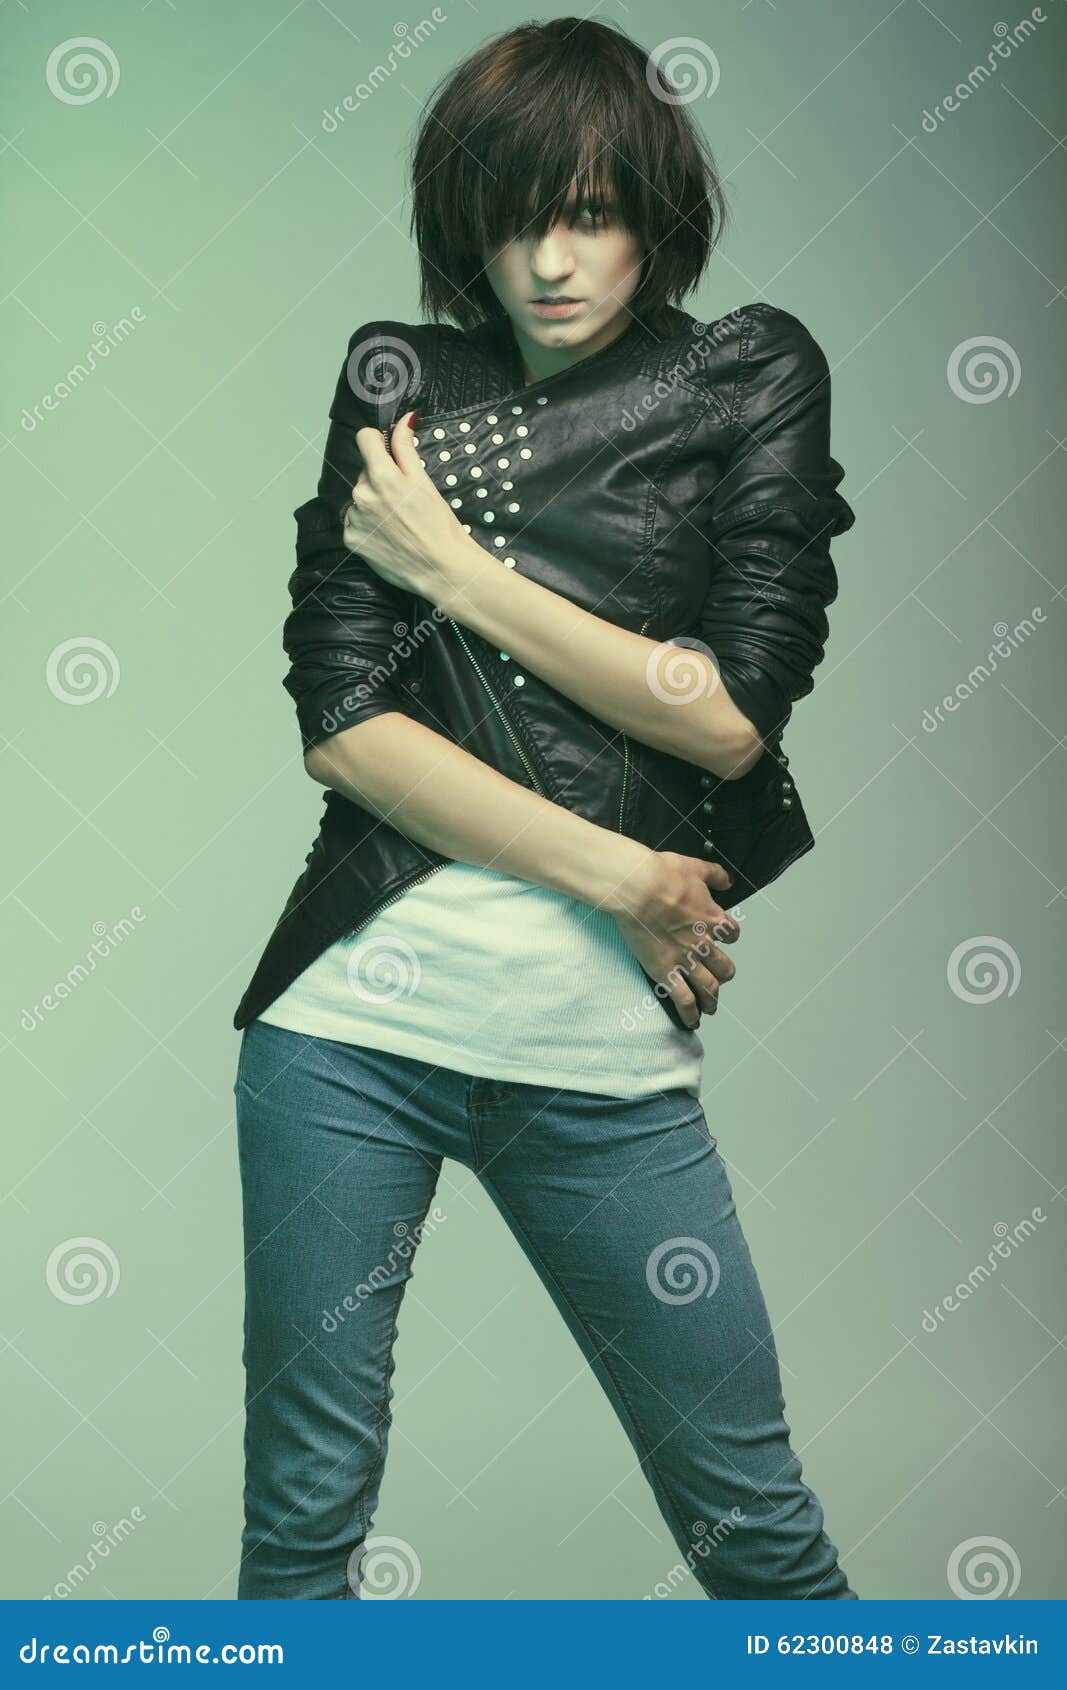 Heroin chic stock photo. Image of model, androgyny, pale - 62300848